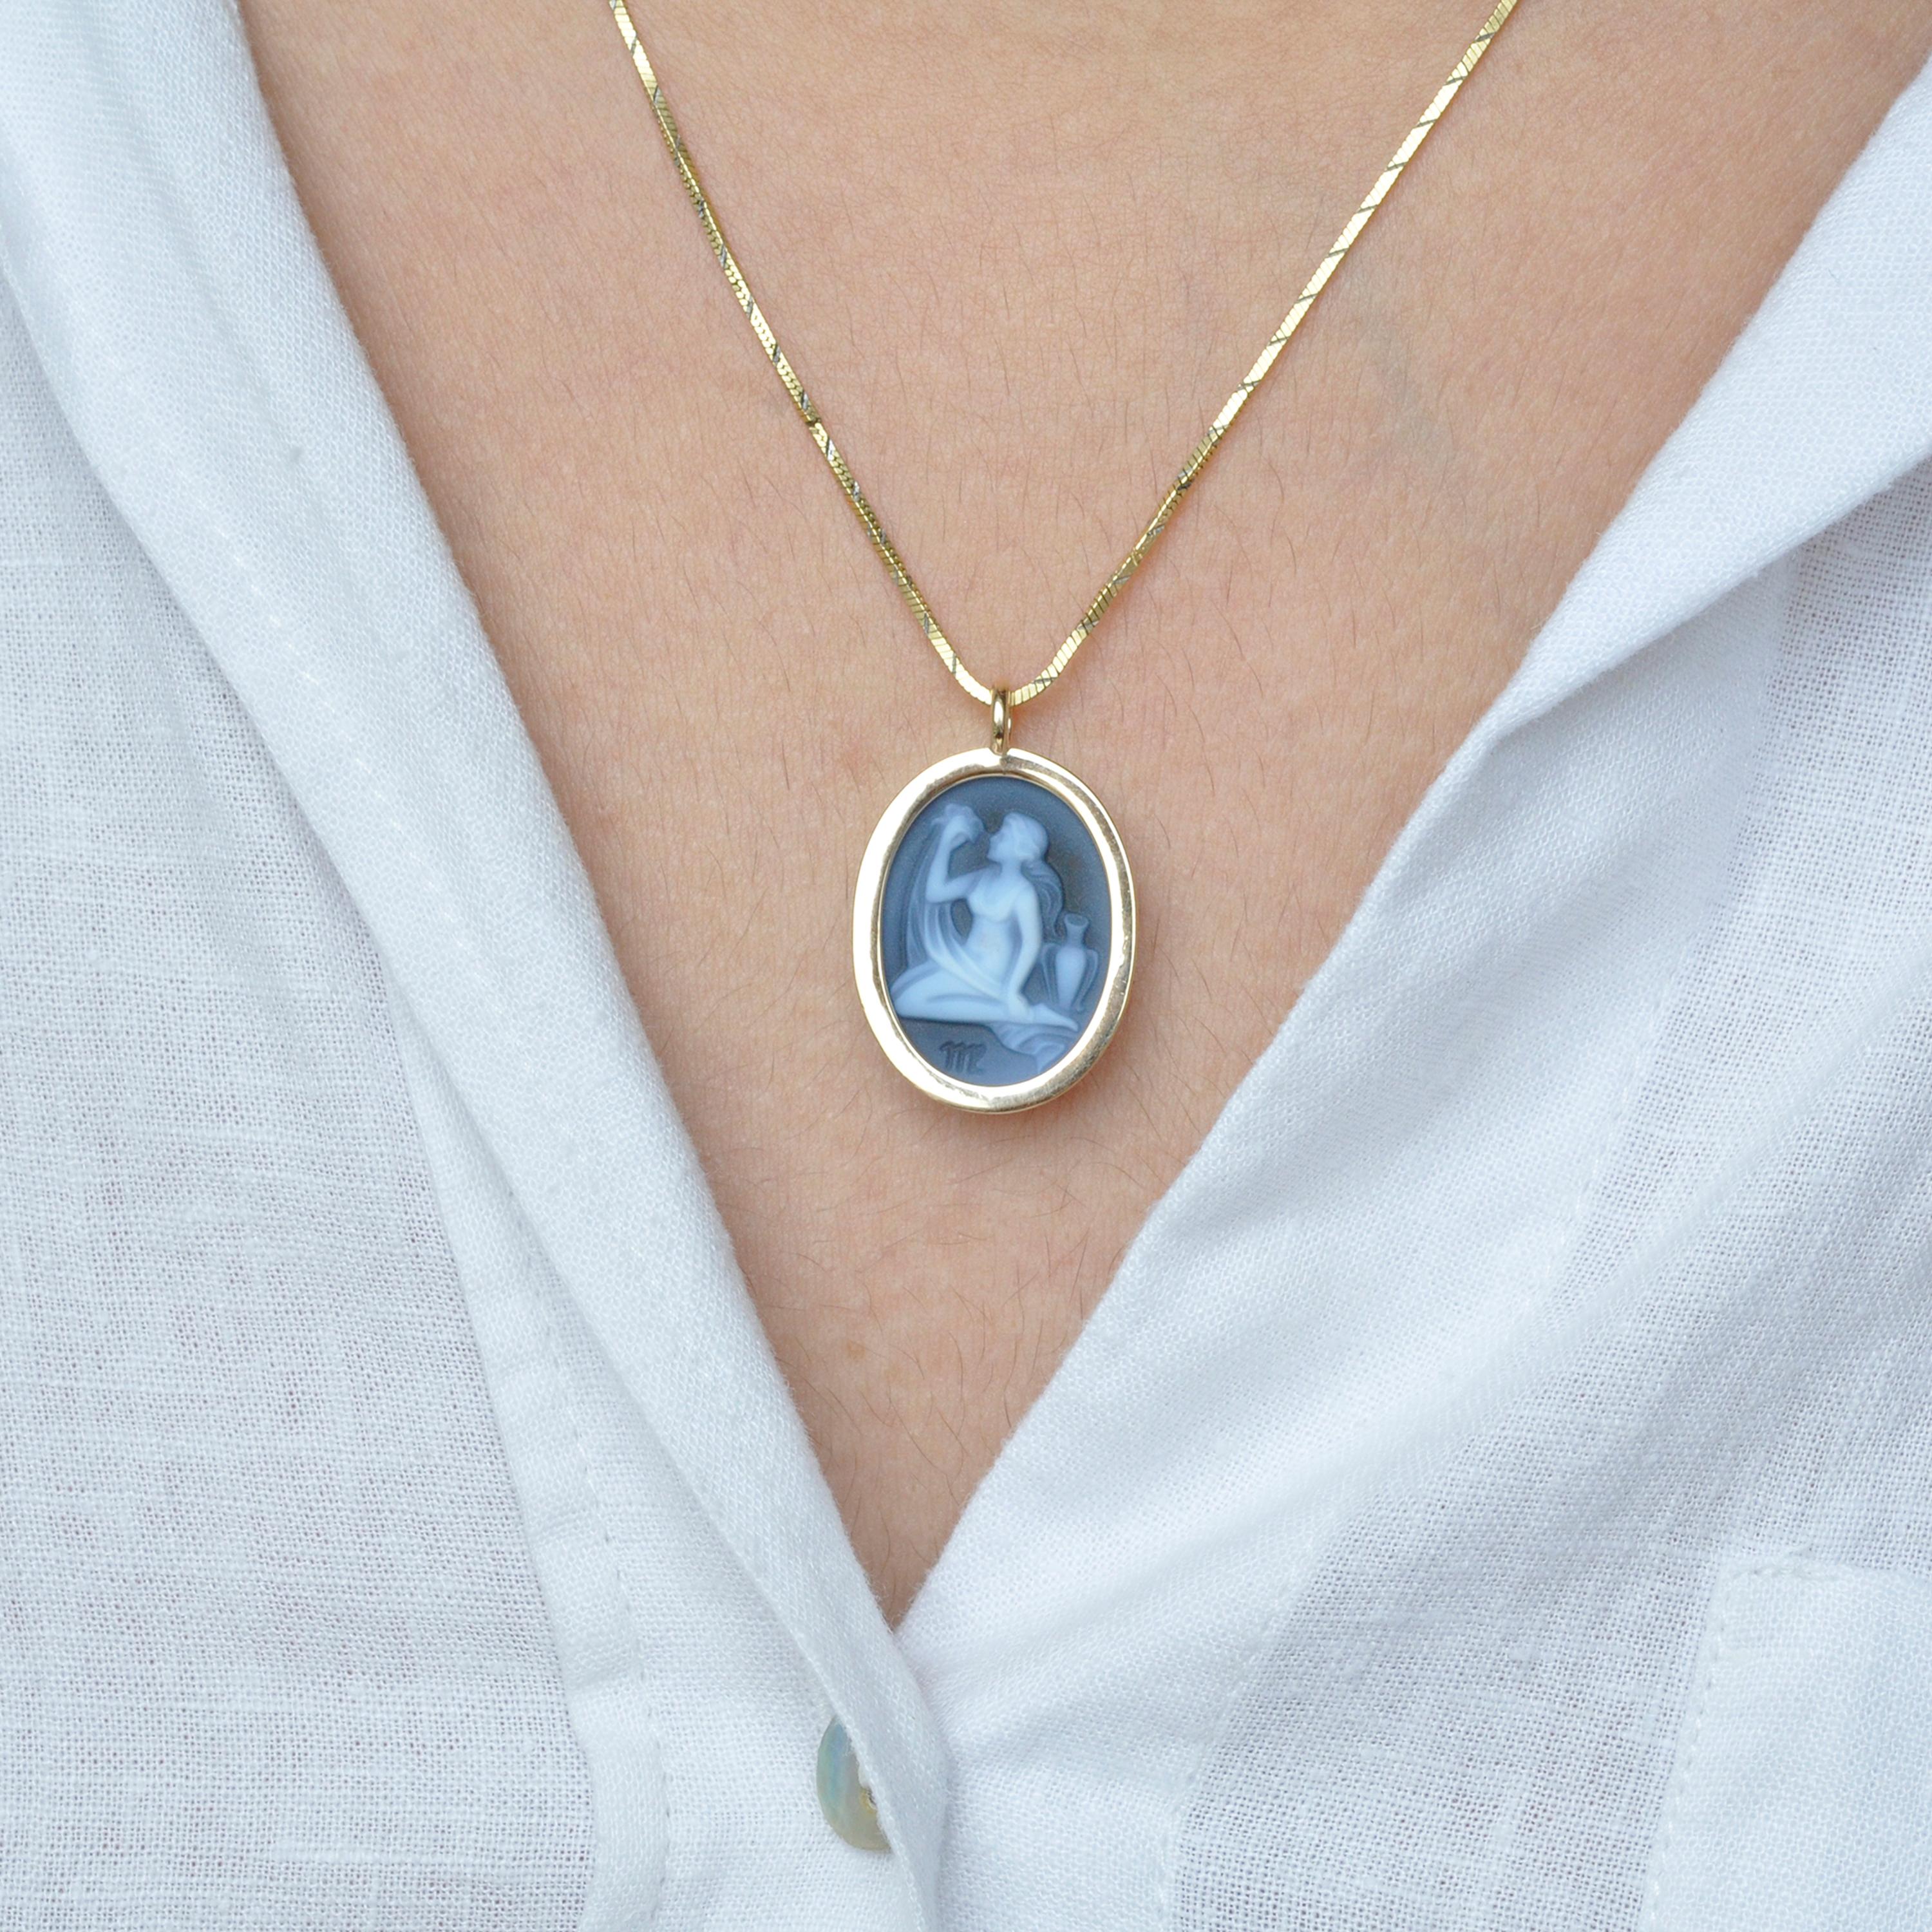 The reversible pendant necklace featuring a Virgo sun sign carving cameo zodiac diamond in 14 karat gold is a stunning piece of jewelry that embodies exquisite craftsmanship, elegance, and personalization. With its reversible design, it offers two